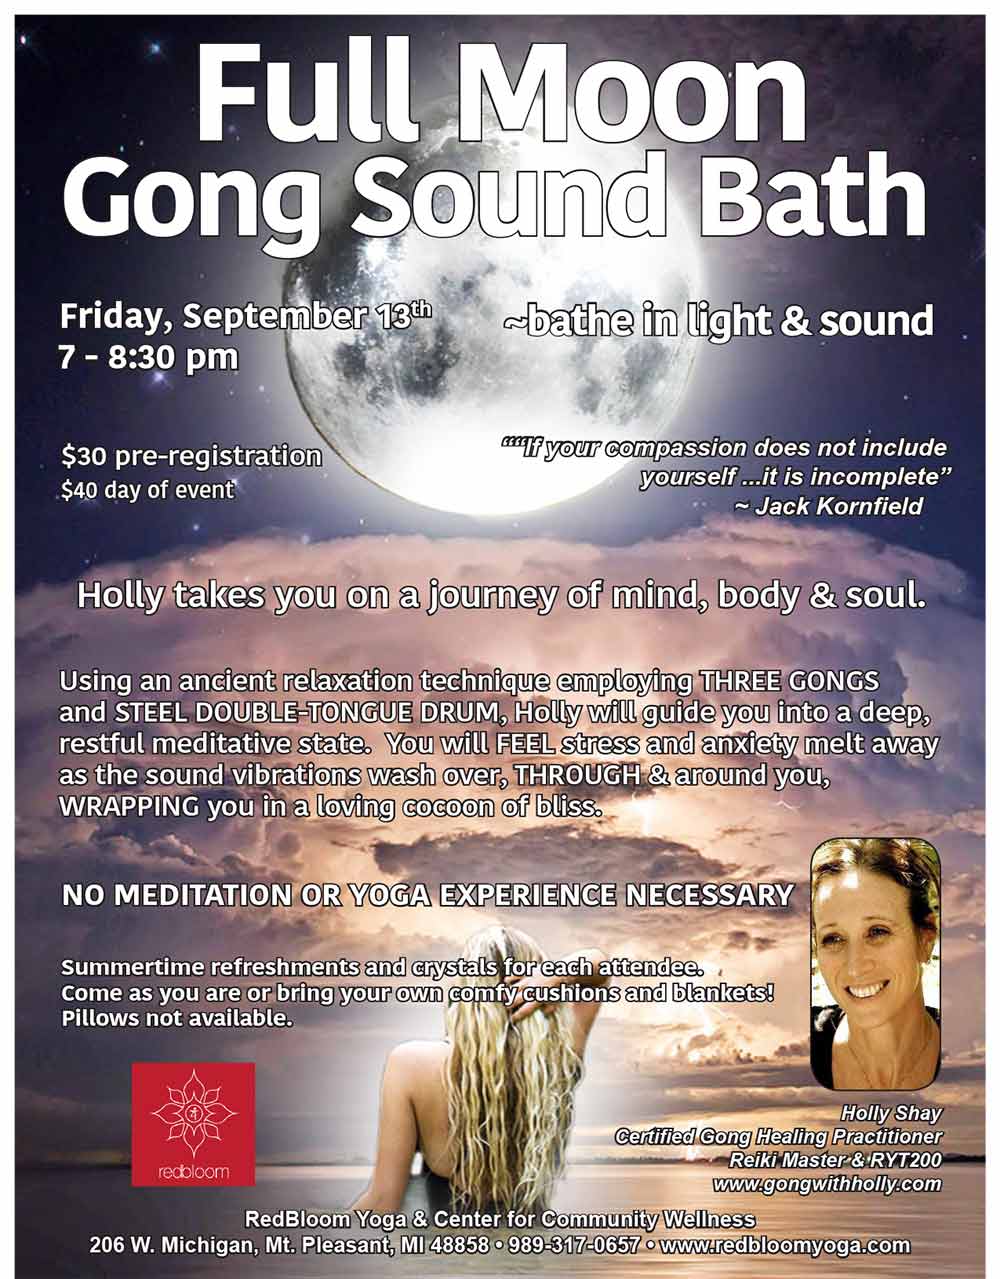 Full Moon Gong Sound Bath, Sept 13, RedBloom Yoga, Mt. Pleasant Holly Shay Certified Gong Healing Practitioner Reiki Master & RYT200